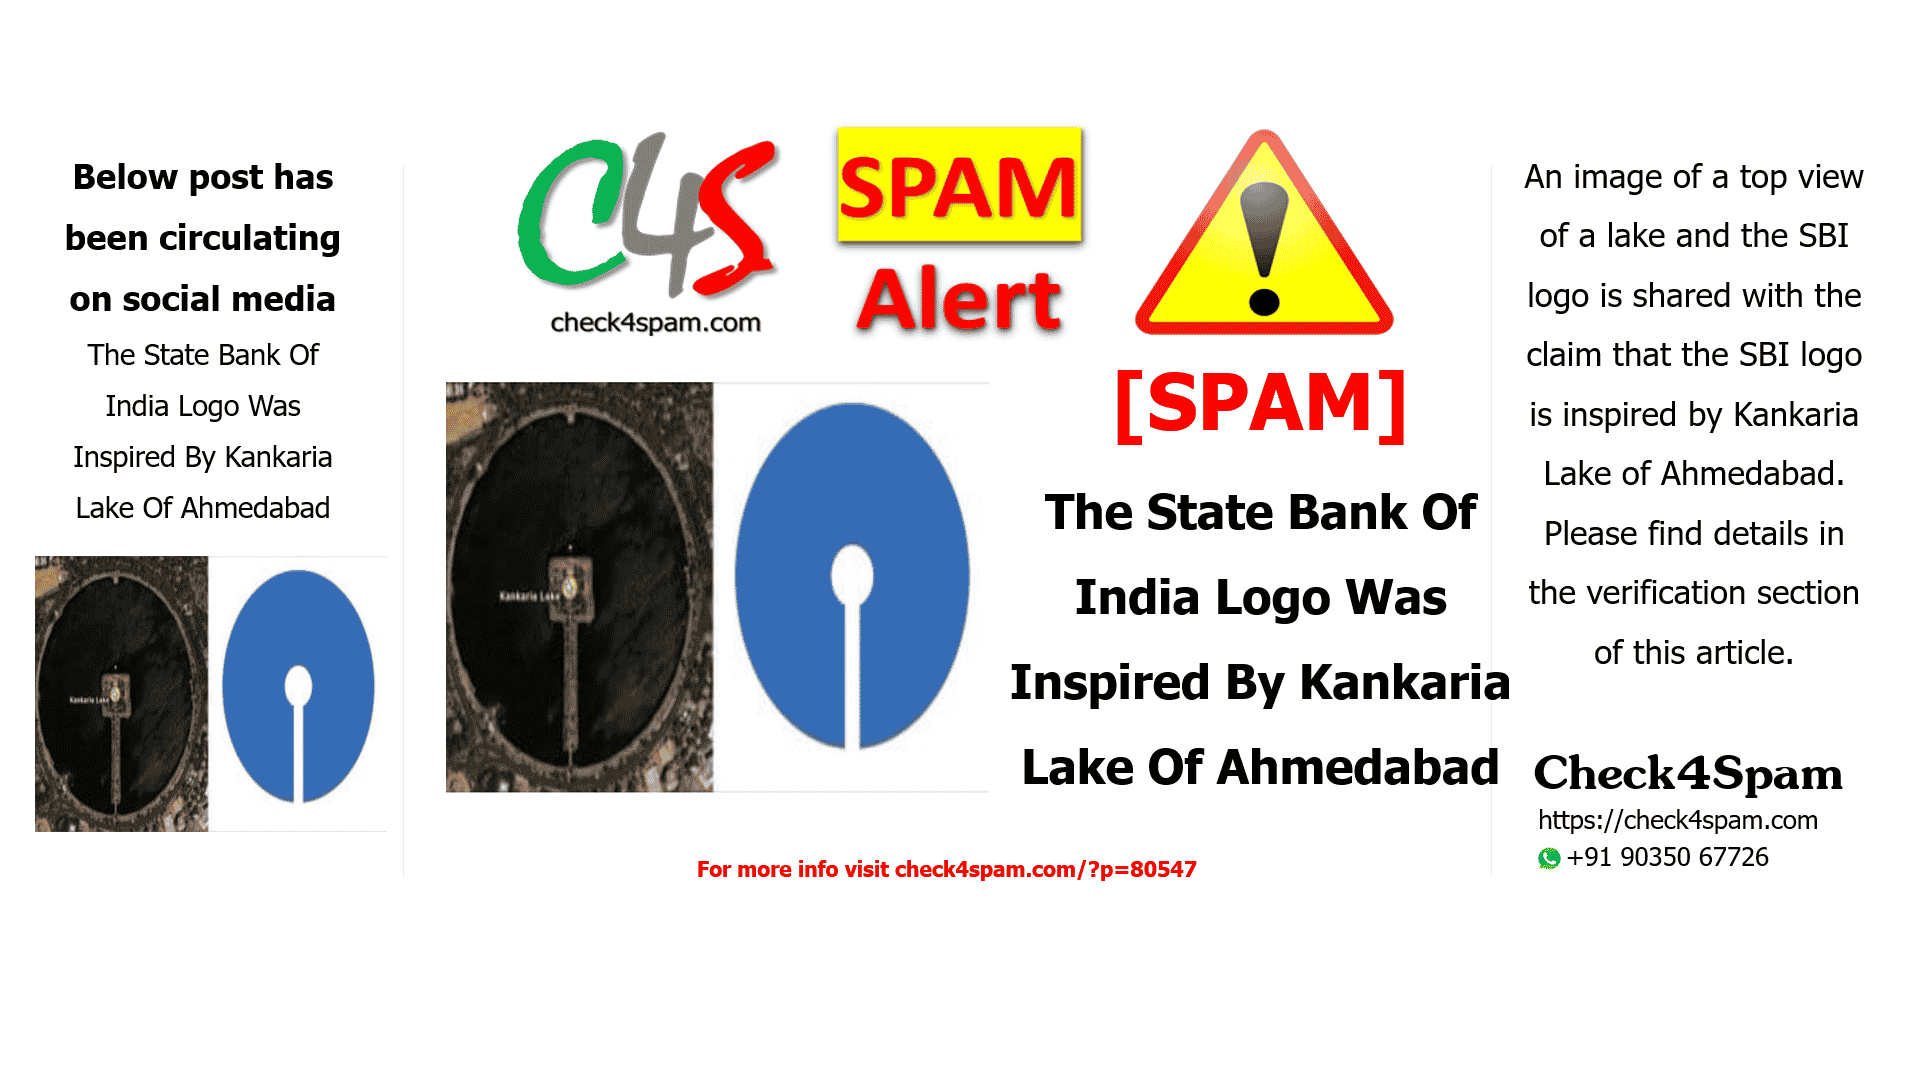 kankaria-lake-ahemadabad-sbi-logo-google-maps - The Best of Indian Pop  Culture & What's Trending on Web